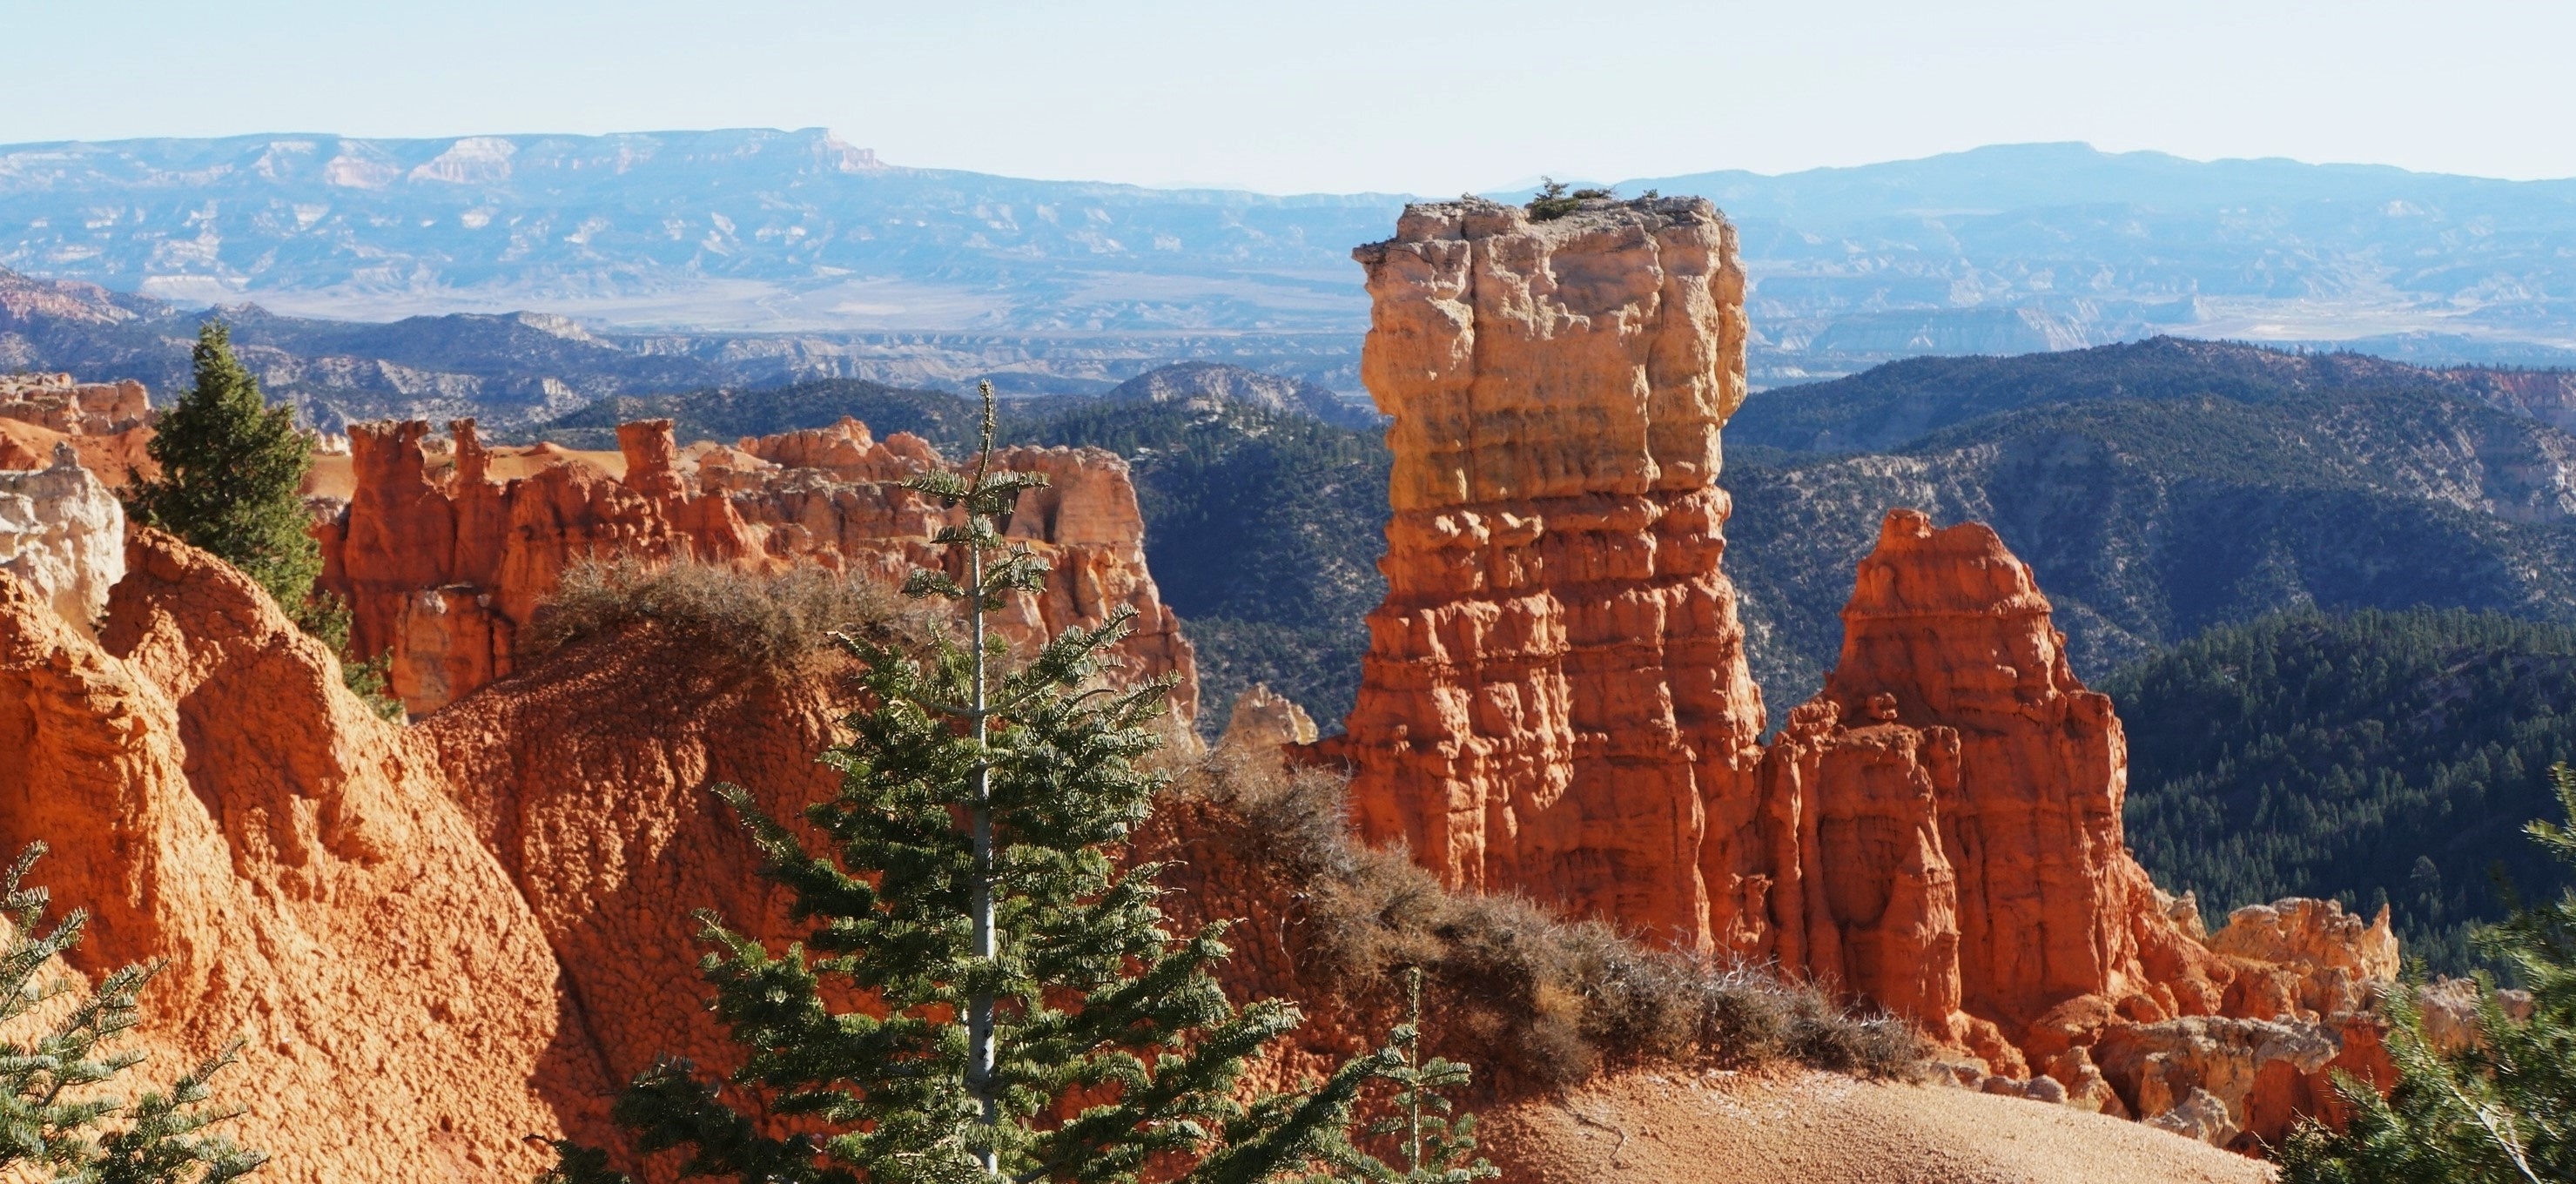 Bryce Canyon National Park, Barry travelography, Stunning wallpapers, Nature beauty, 2960x1360 Dual Screen Desktop